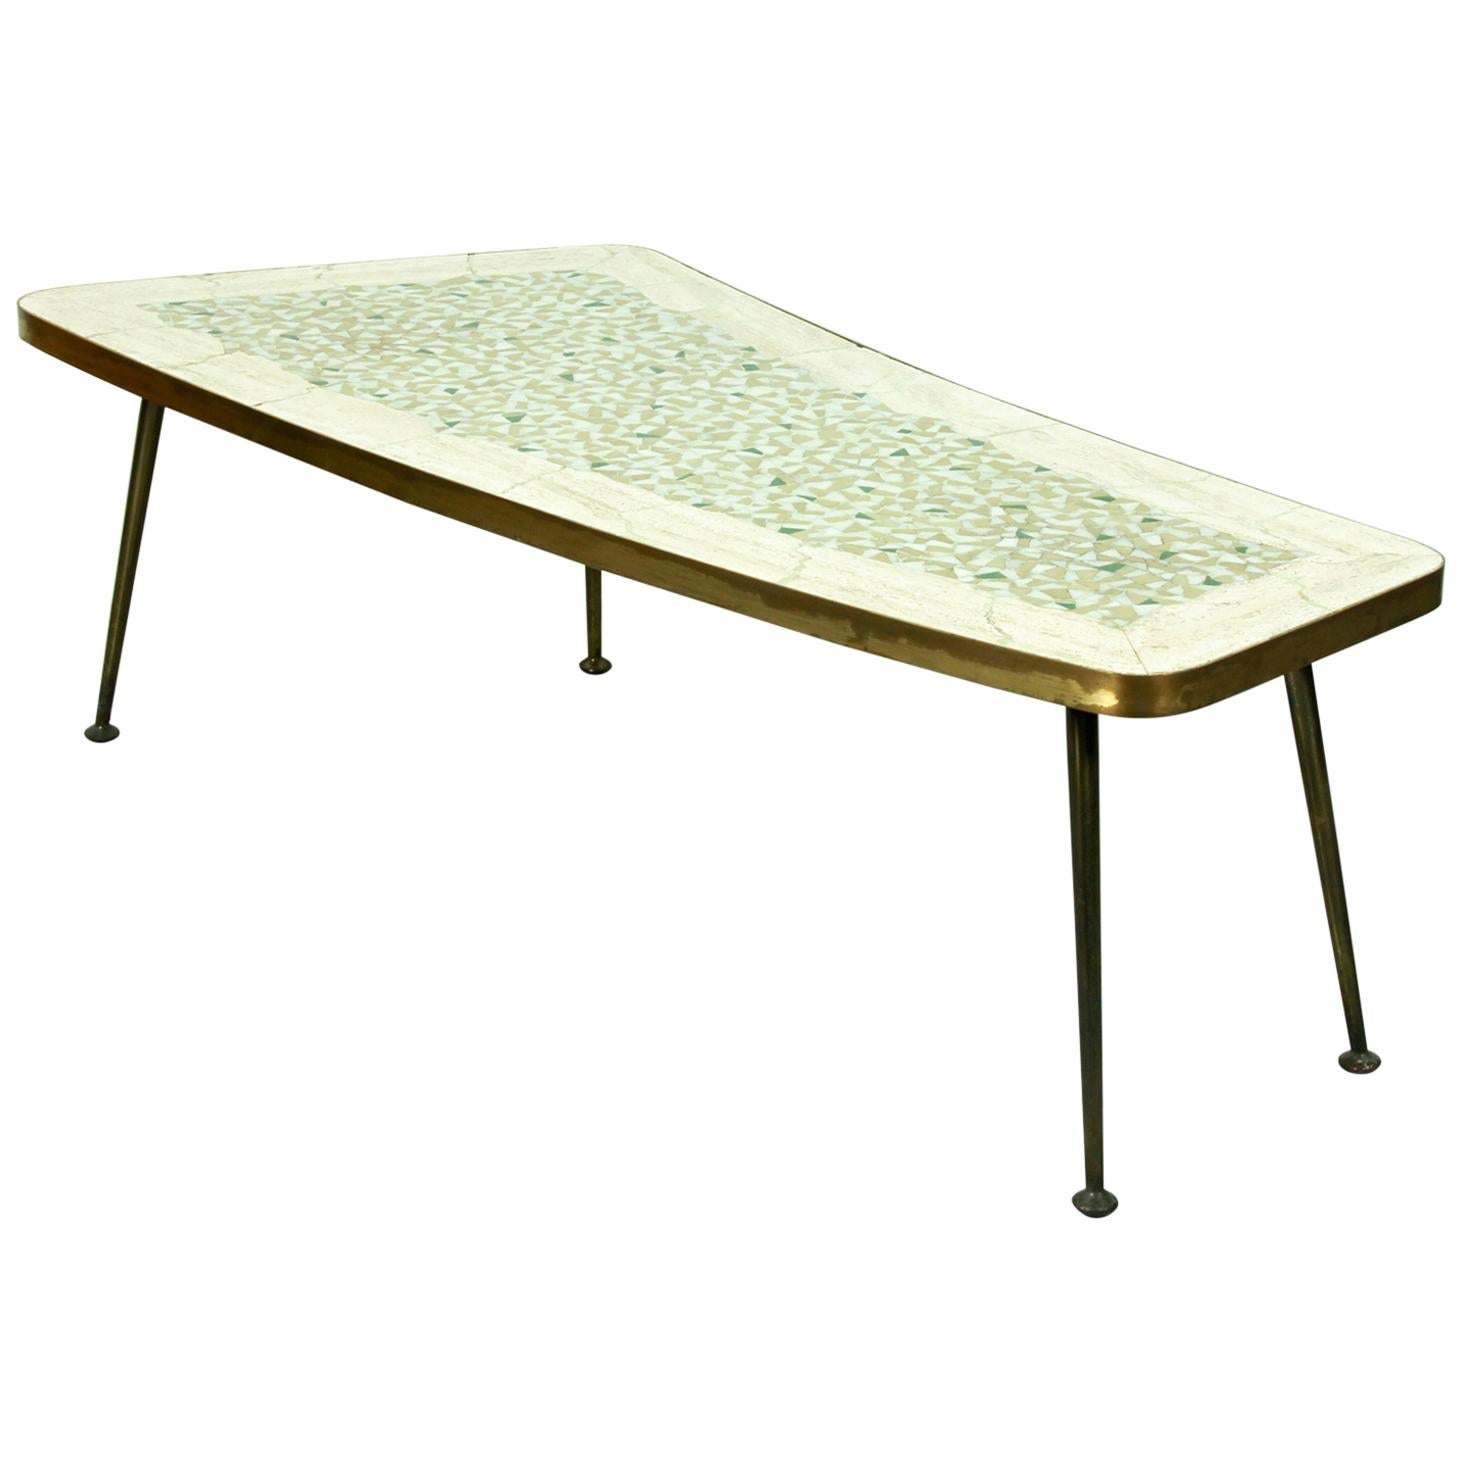 Charming Midcentury Organically Shaped Brass-Leg Coffee Table, 1950s